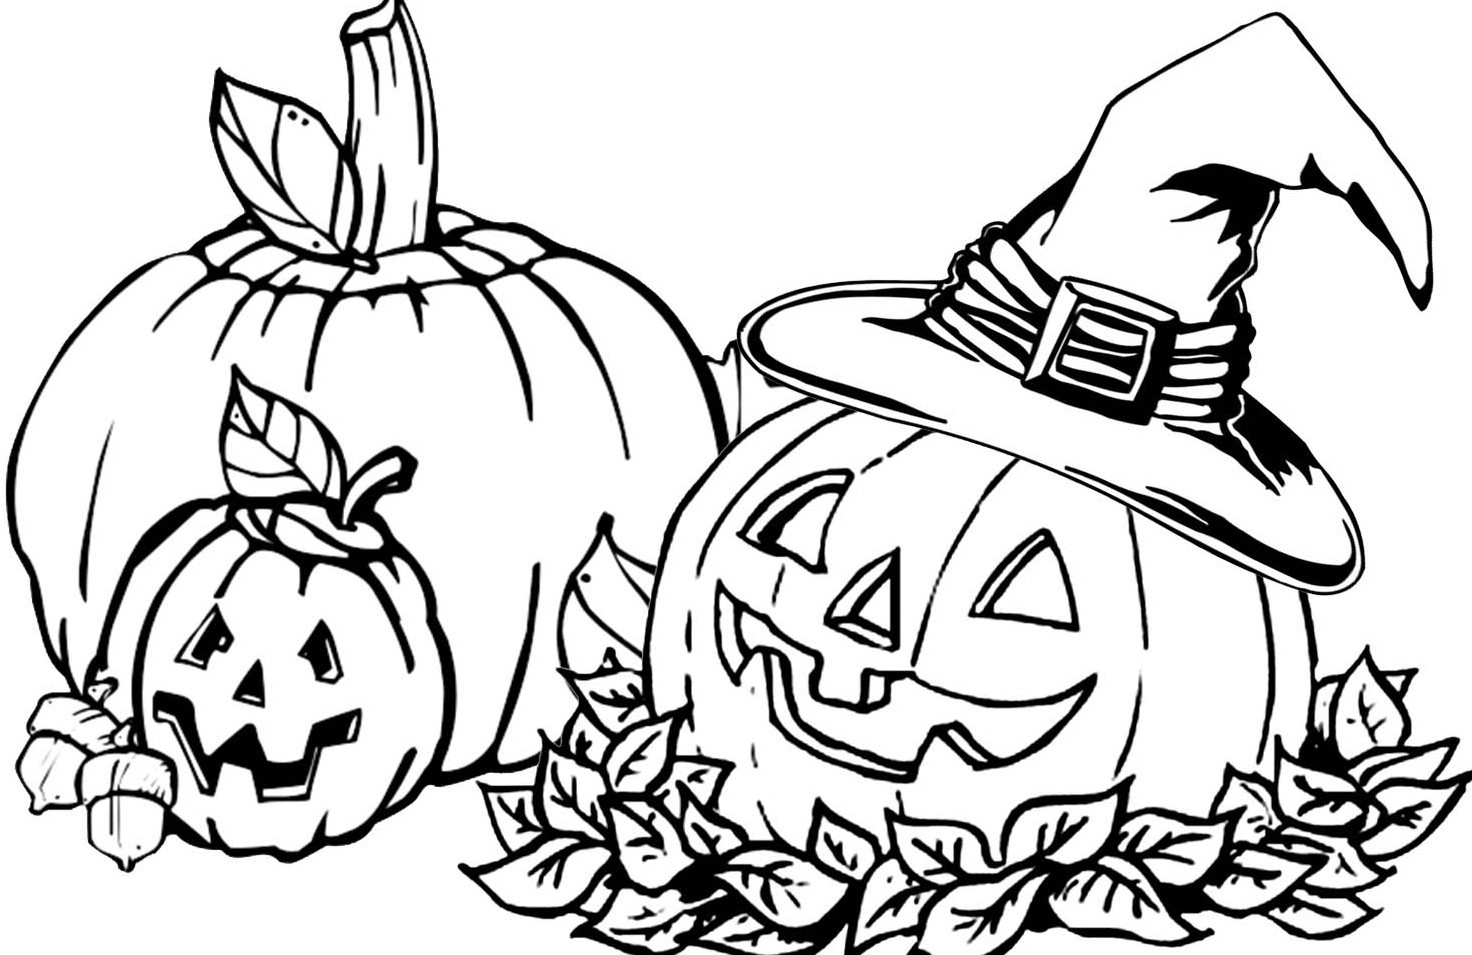 Pumpkin Coloring Pages For Kids
 Pumpkin Patch Coloring Page